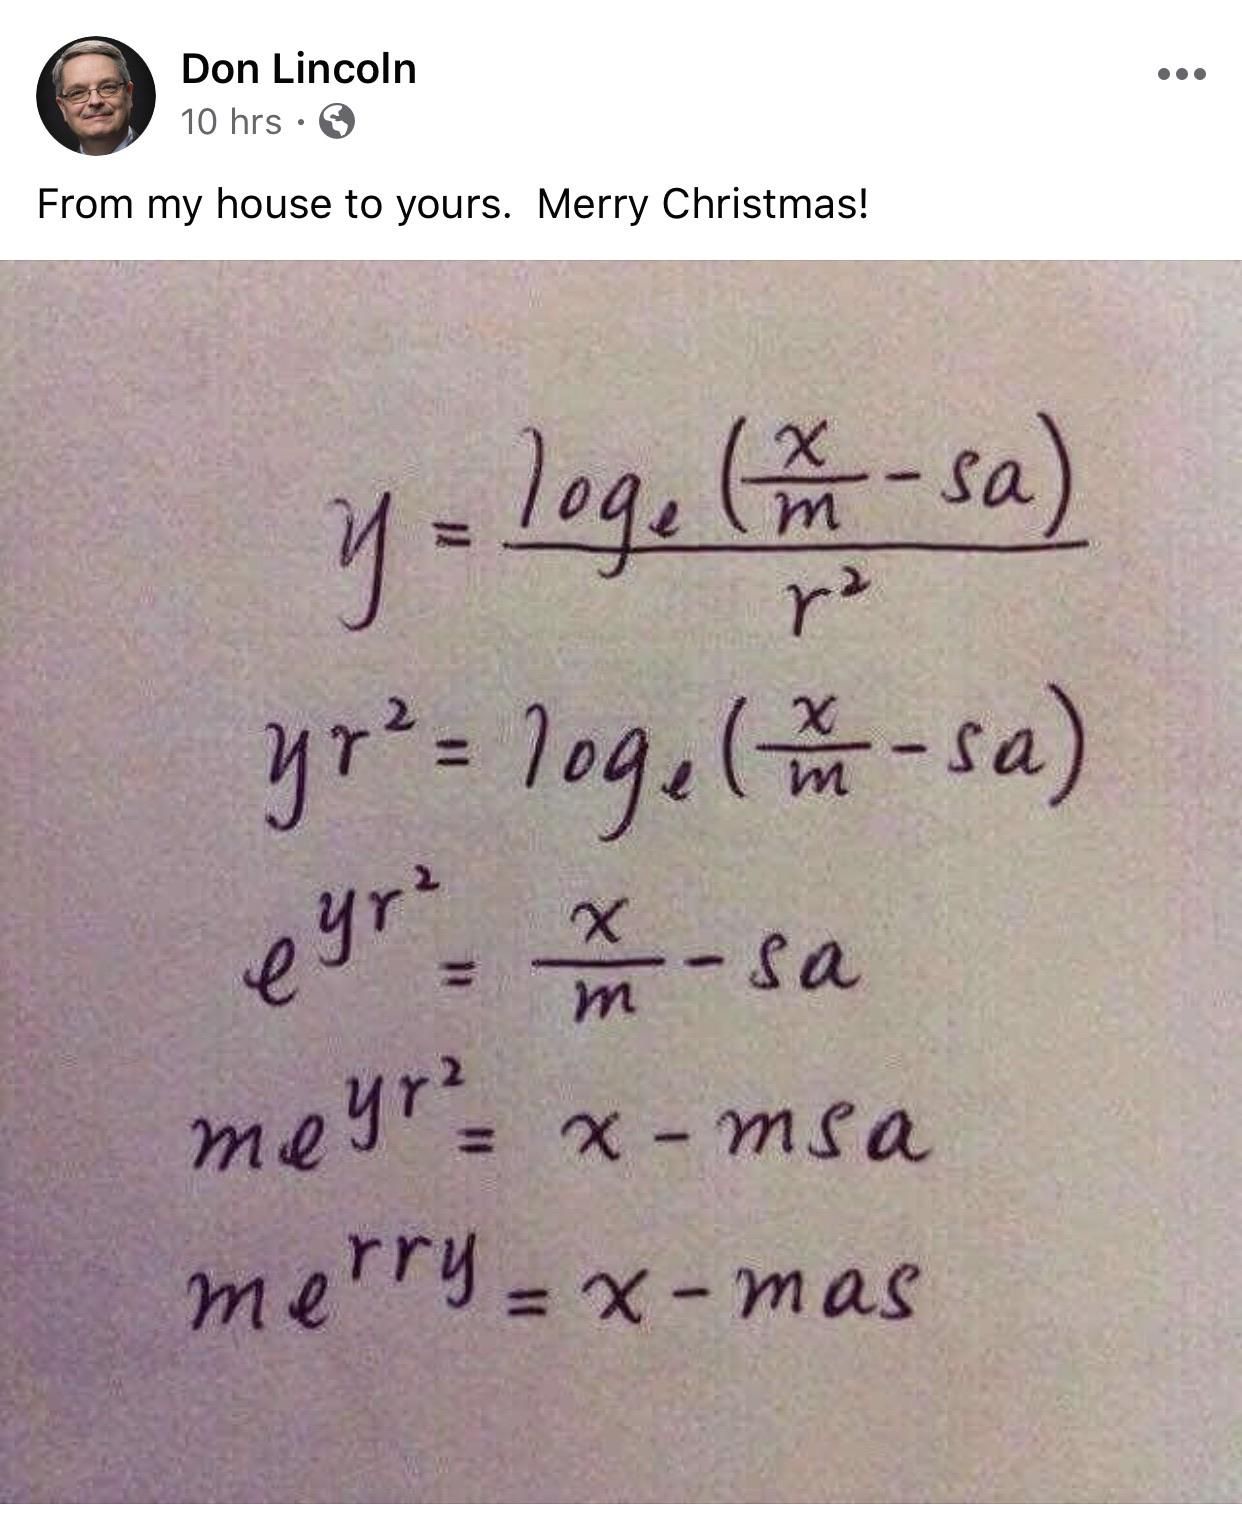 From one of the scientists I follow. Merry Christmas guys